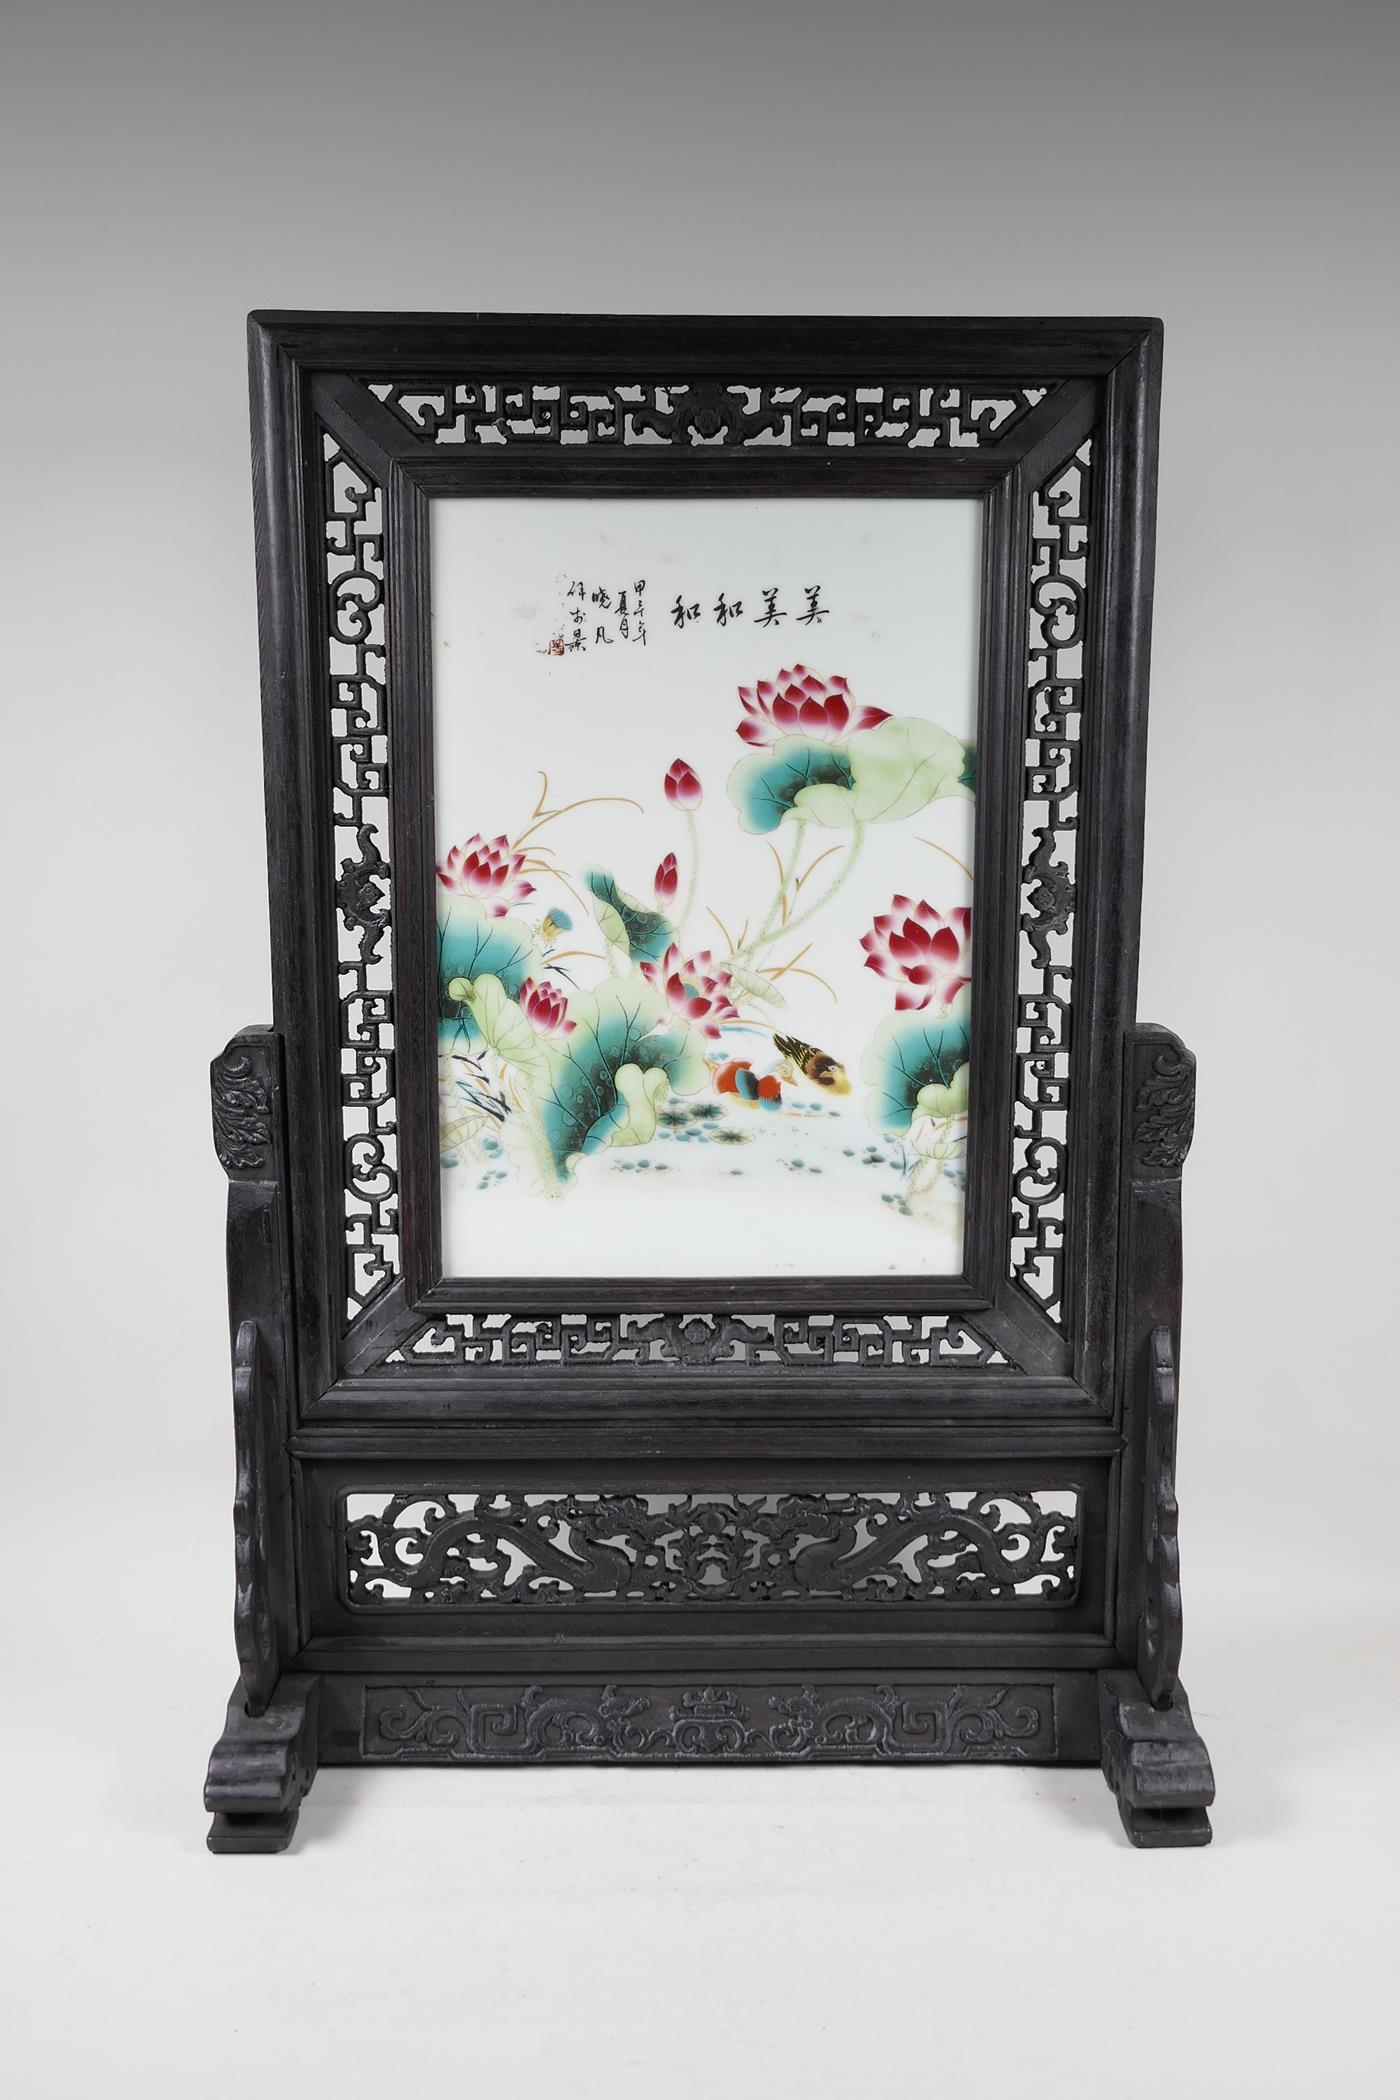 A Chinese polychrome porcelain table screen in a hardwood frame, decorated with waterfowl beneath